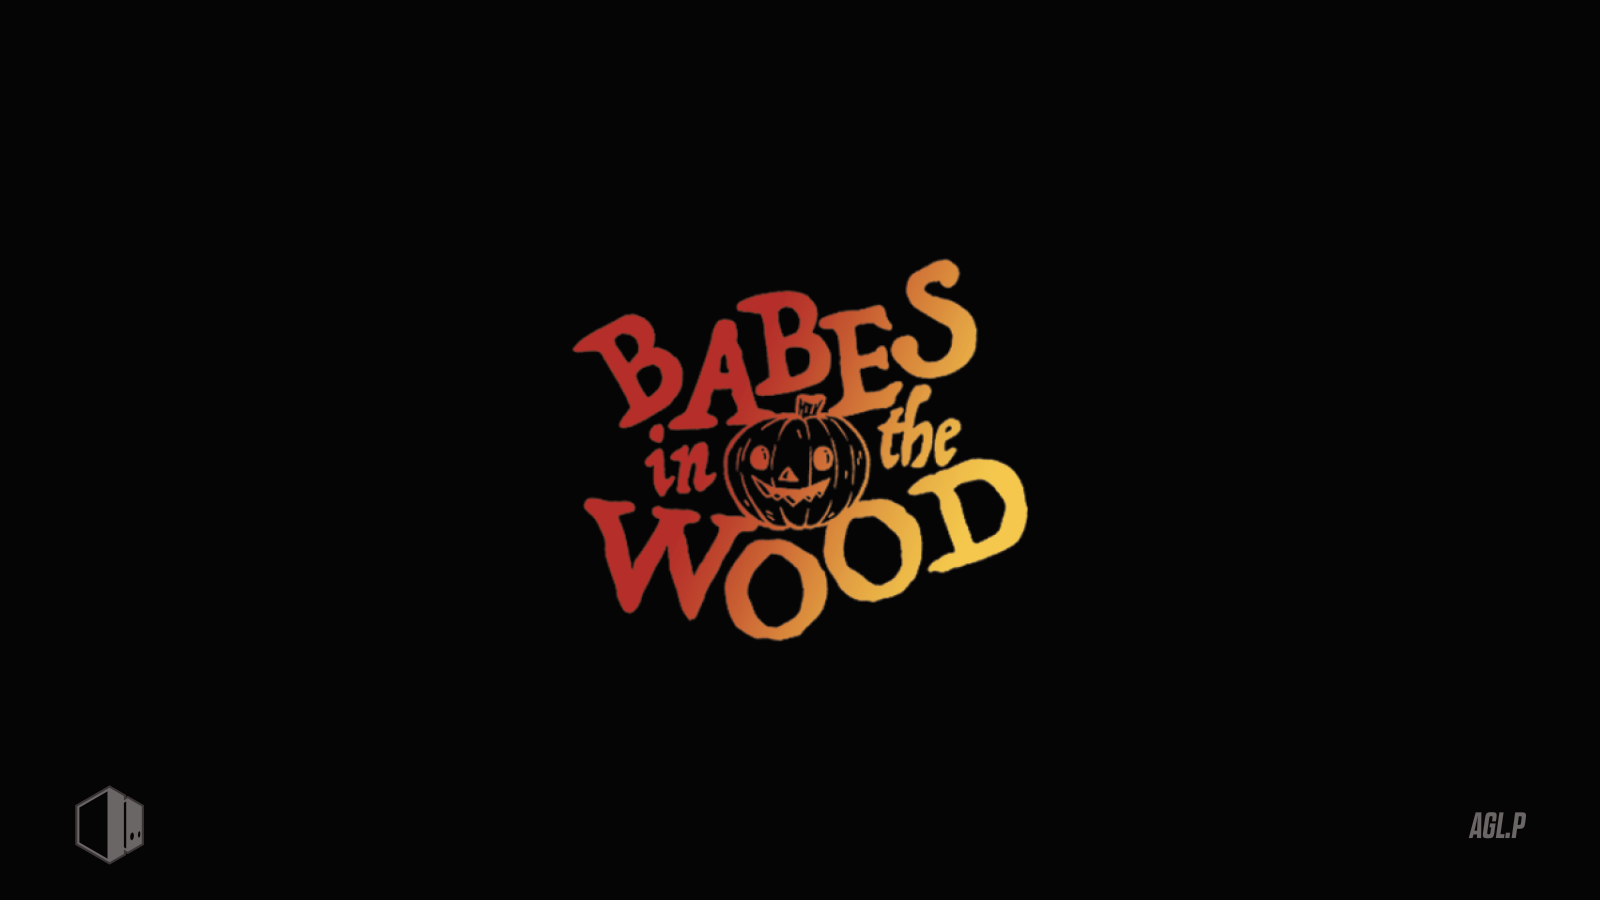 Babes in the Wood | World Champ Game Co. | Adam Vass